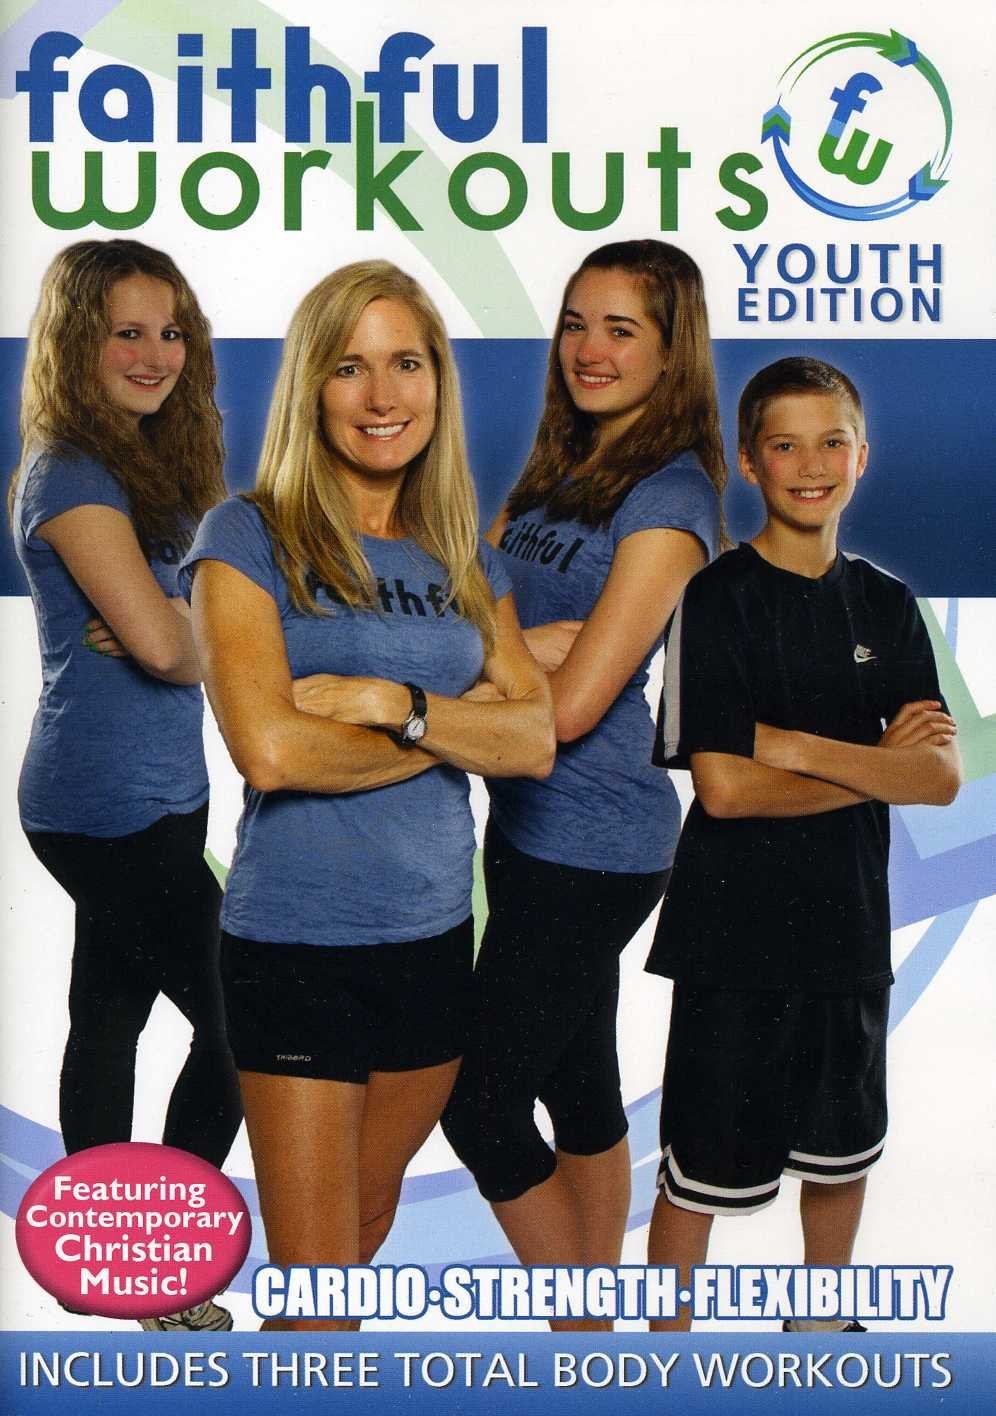 Faithful Workouts - Youth edition DVD